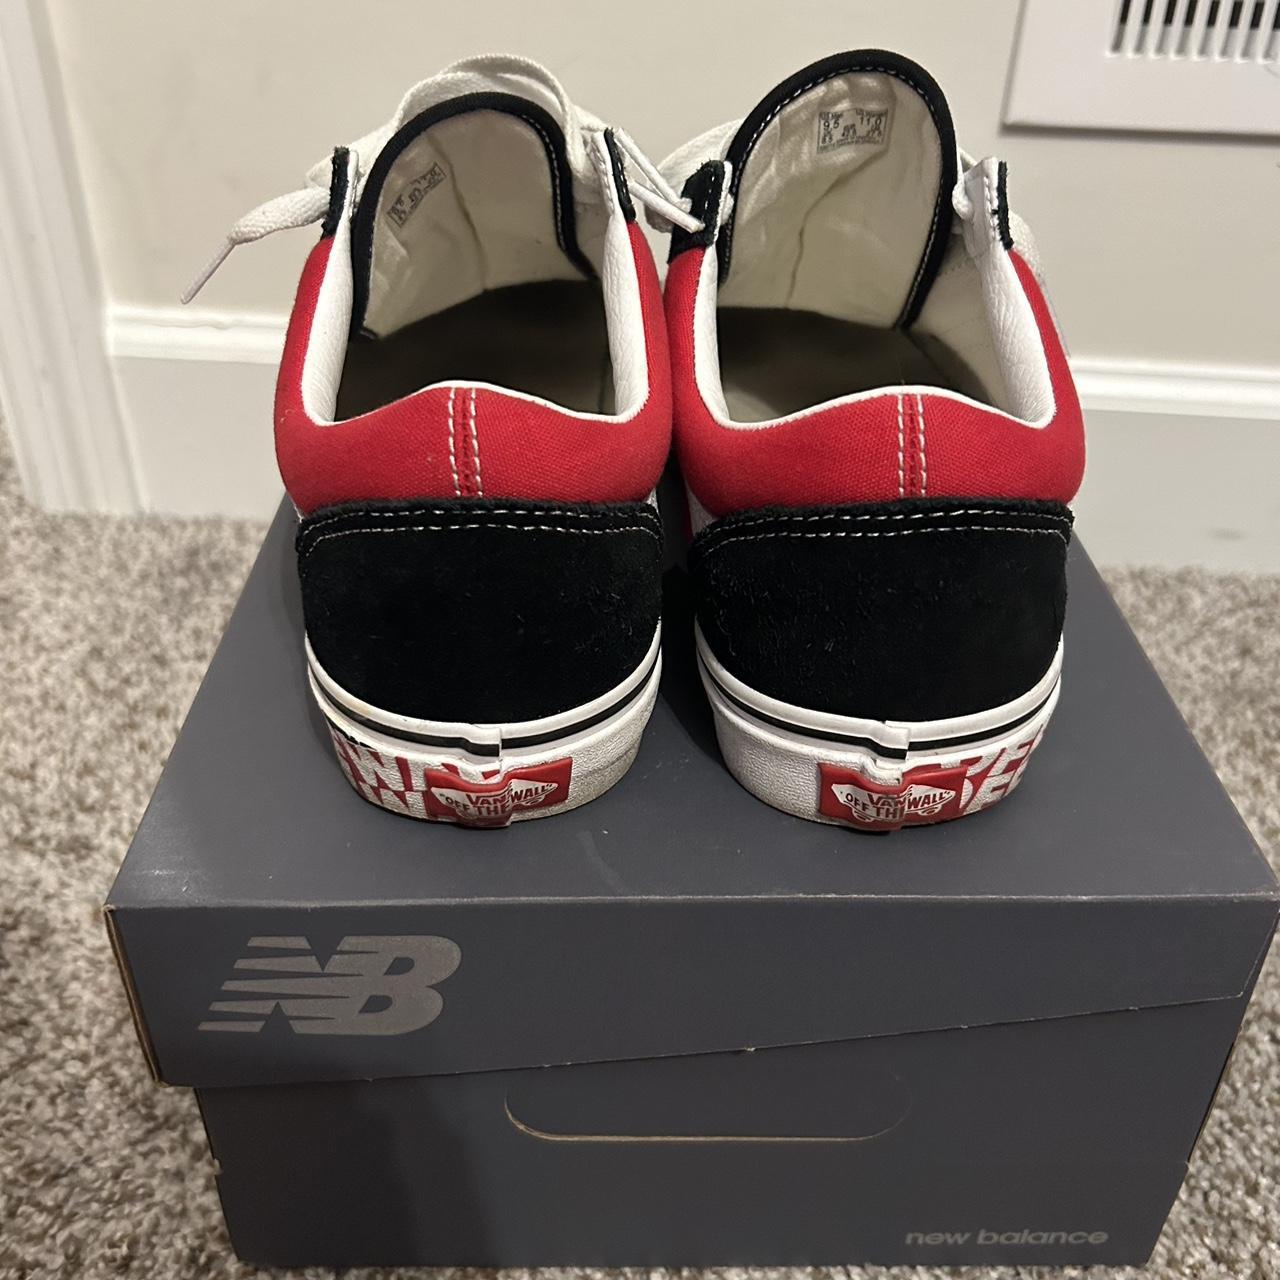 Vans Men's Red and Black Trainers (2)